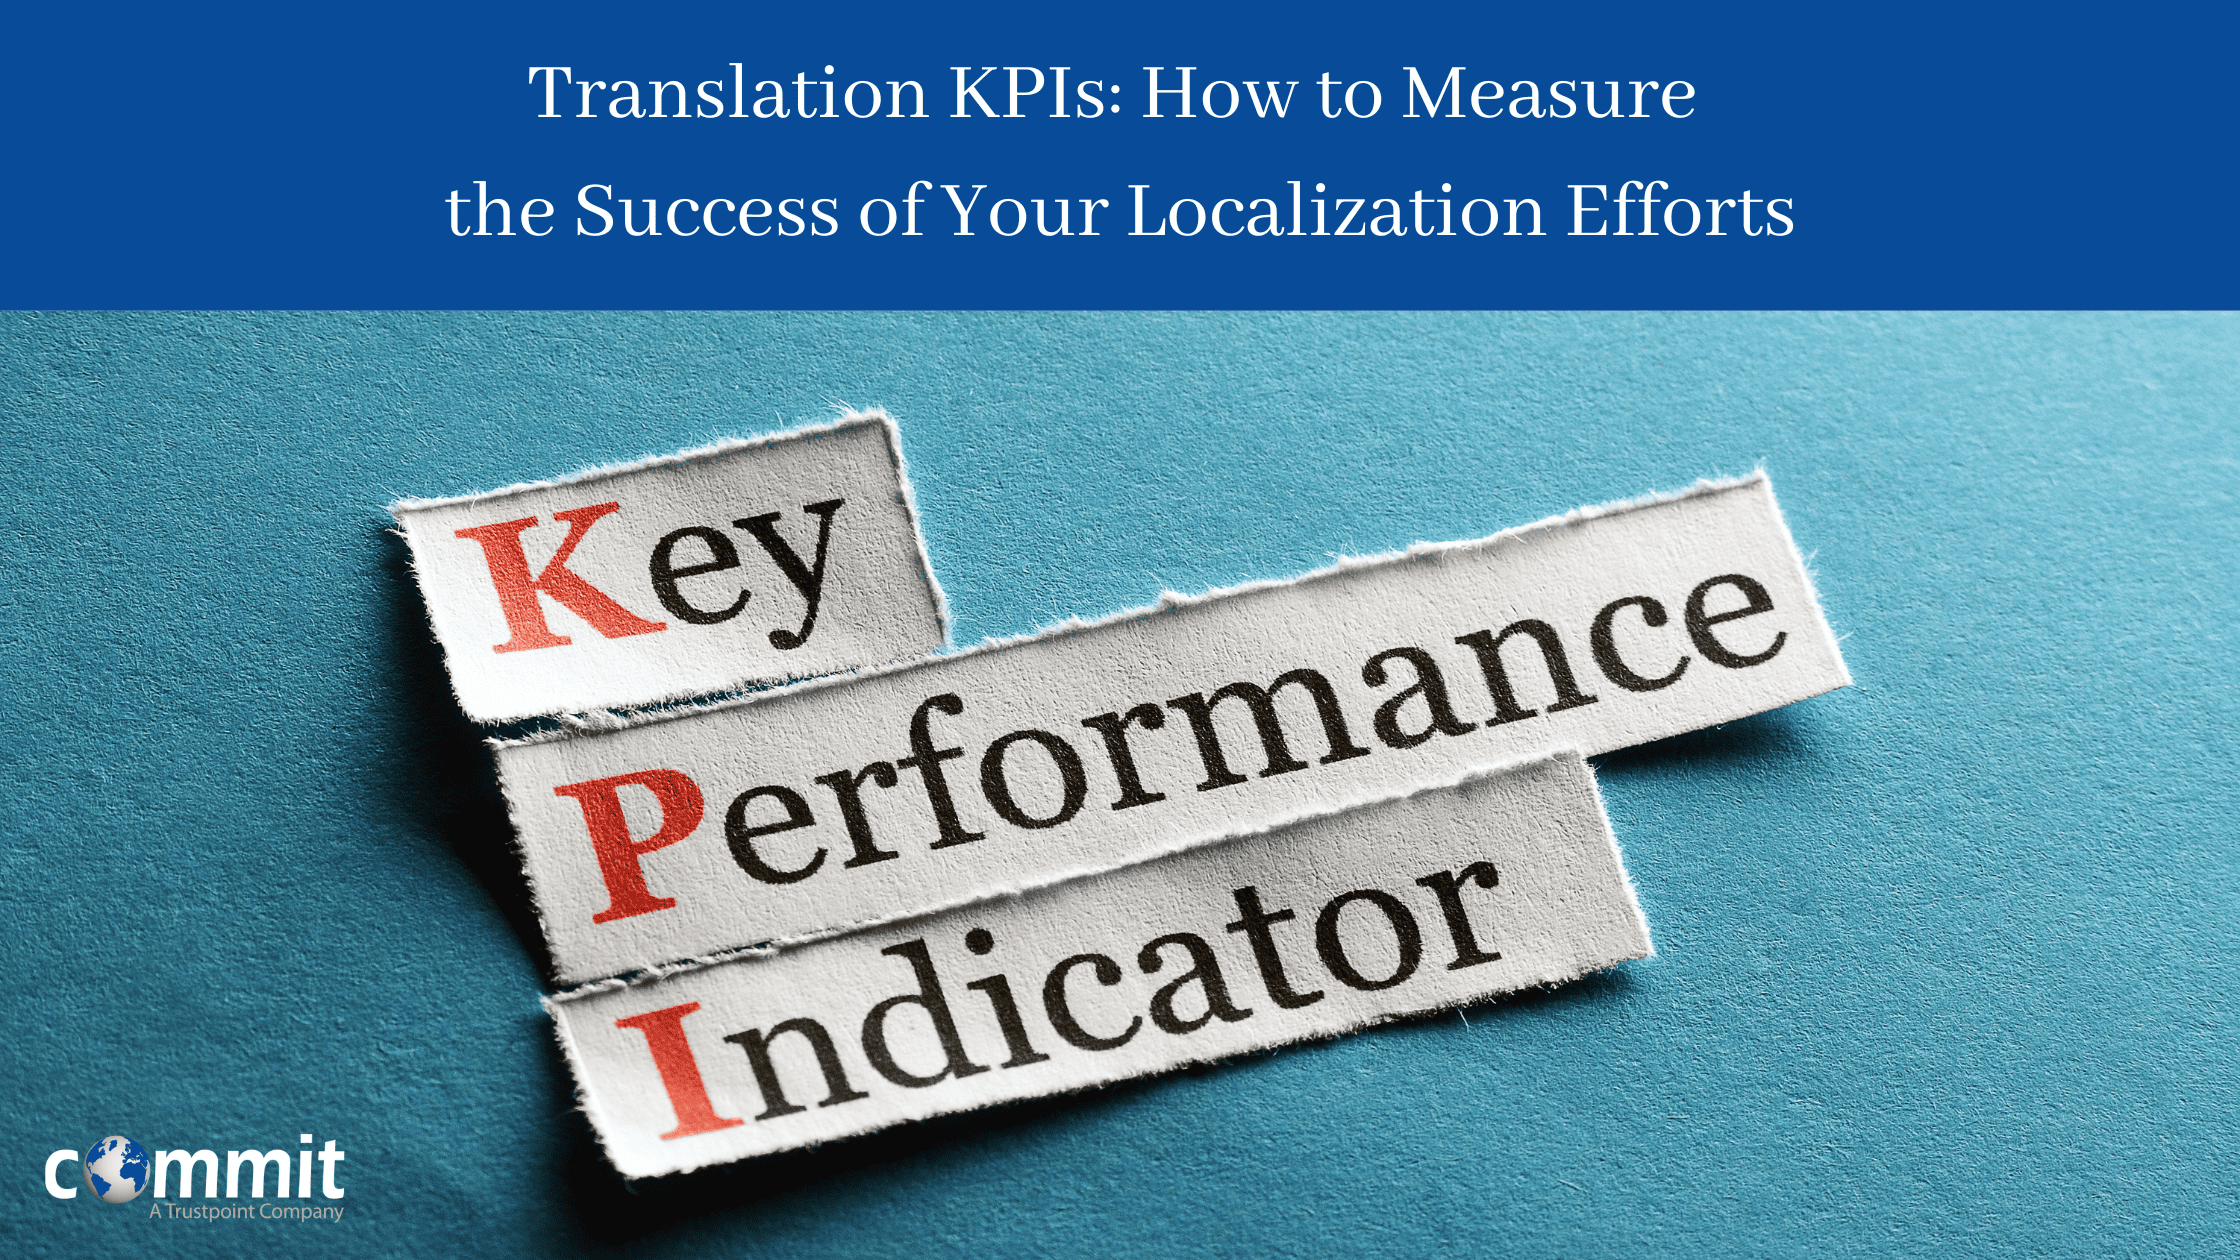 Translation KPIs: How to Measure Your Localization Efforts